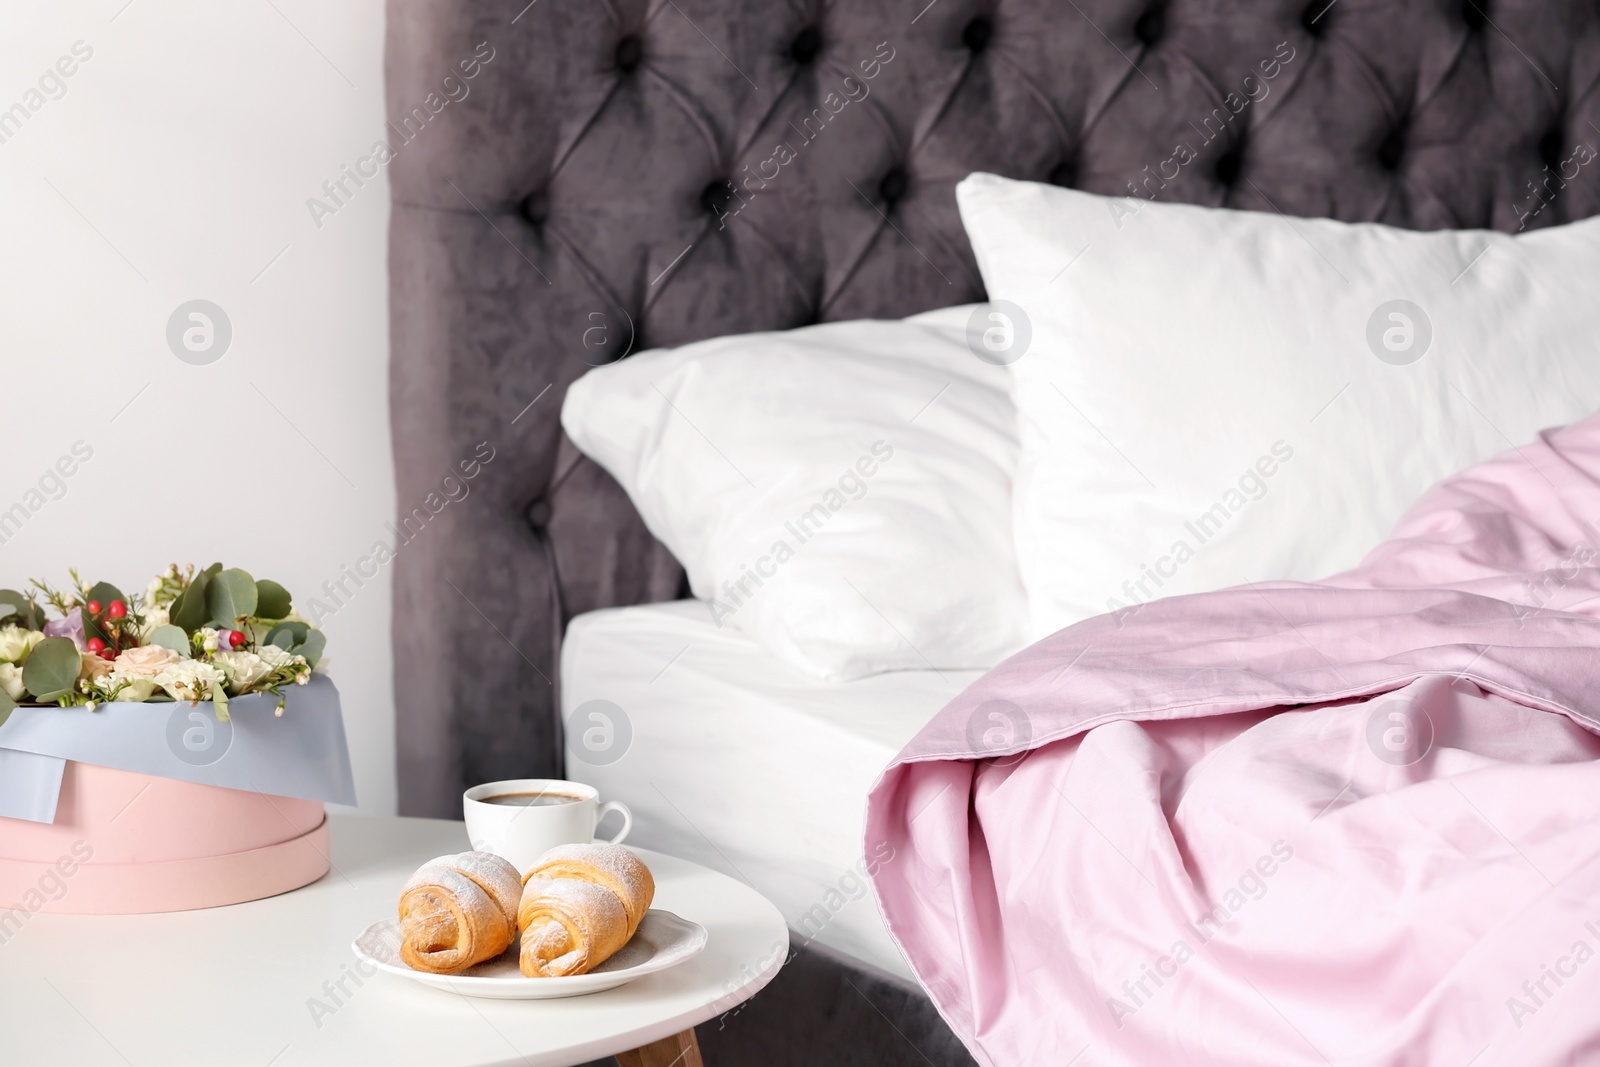 Photo of Plate with delicious croissants and cup of coffee on table near bed